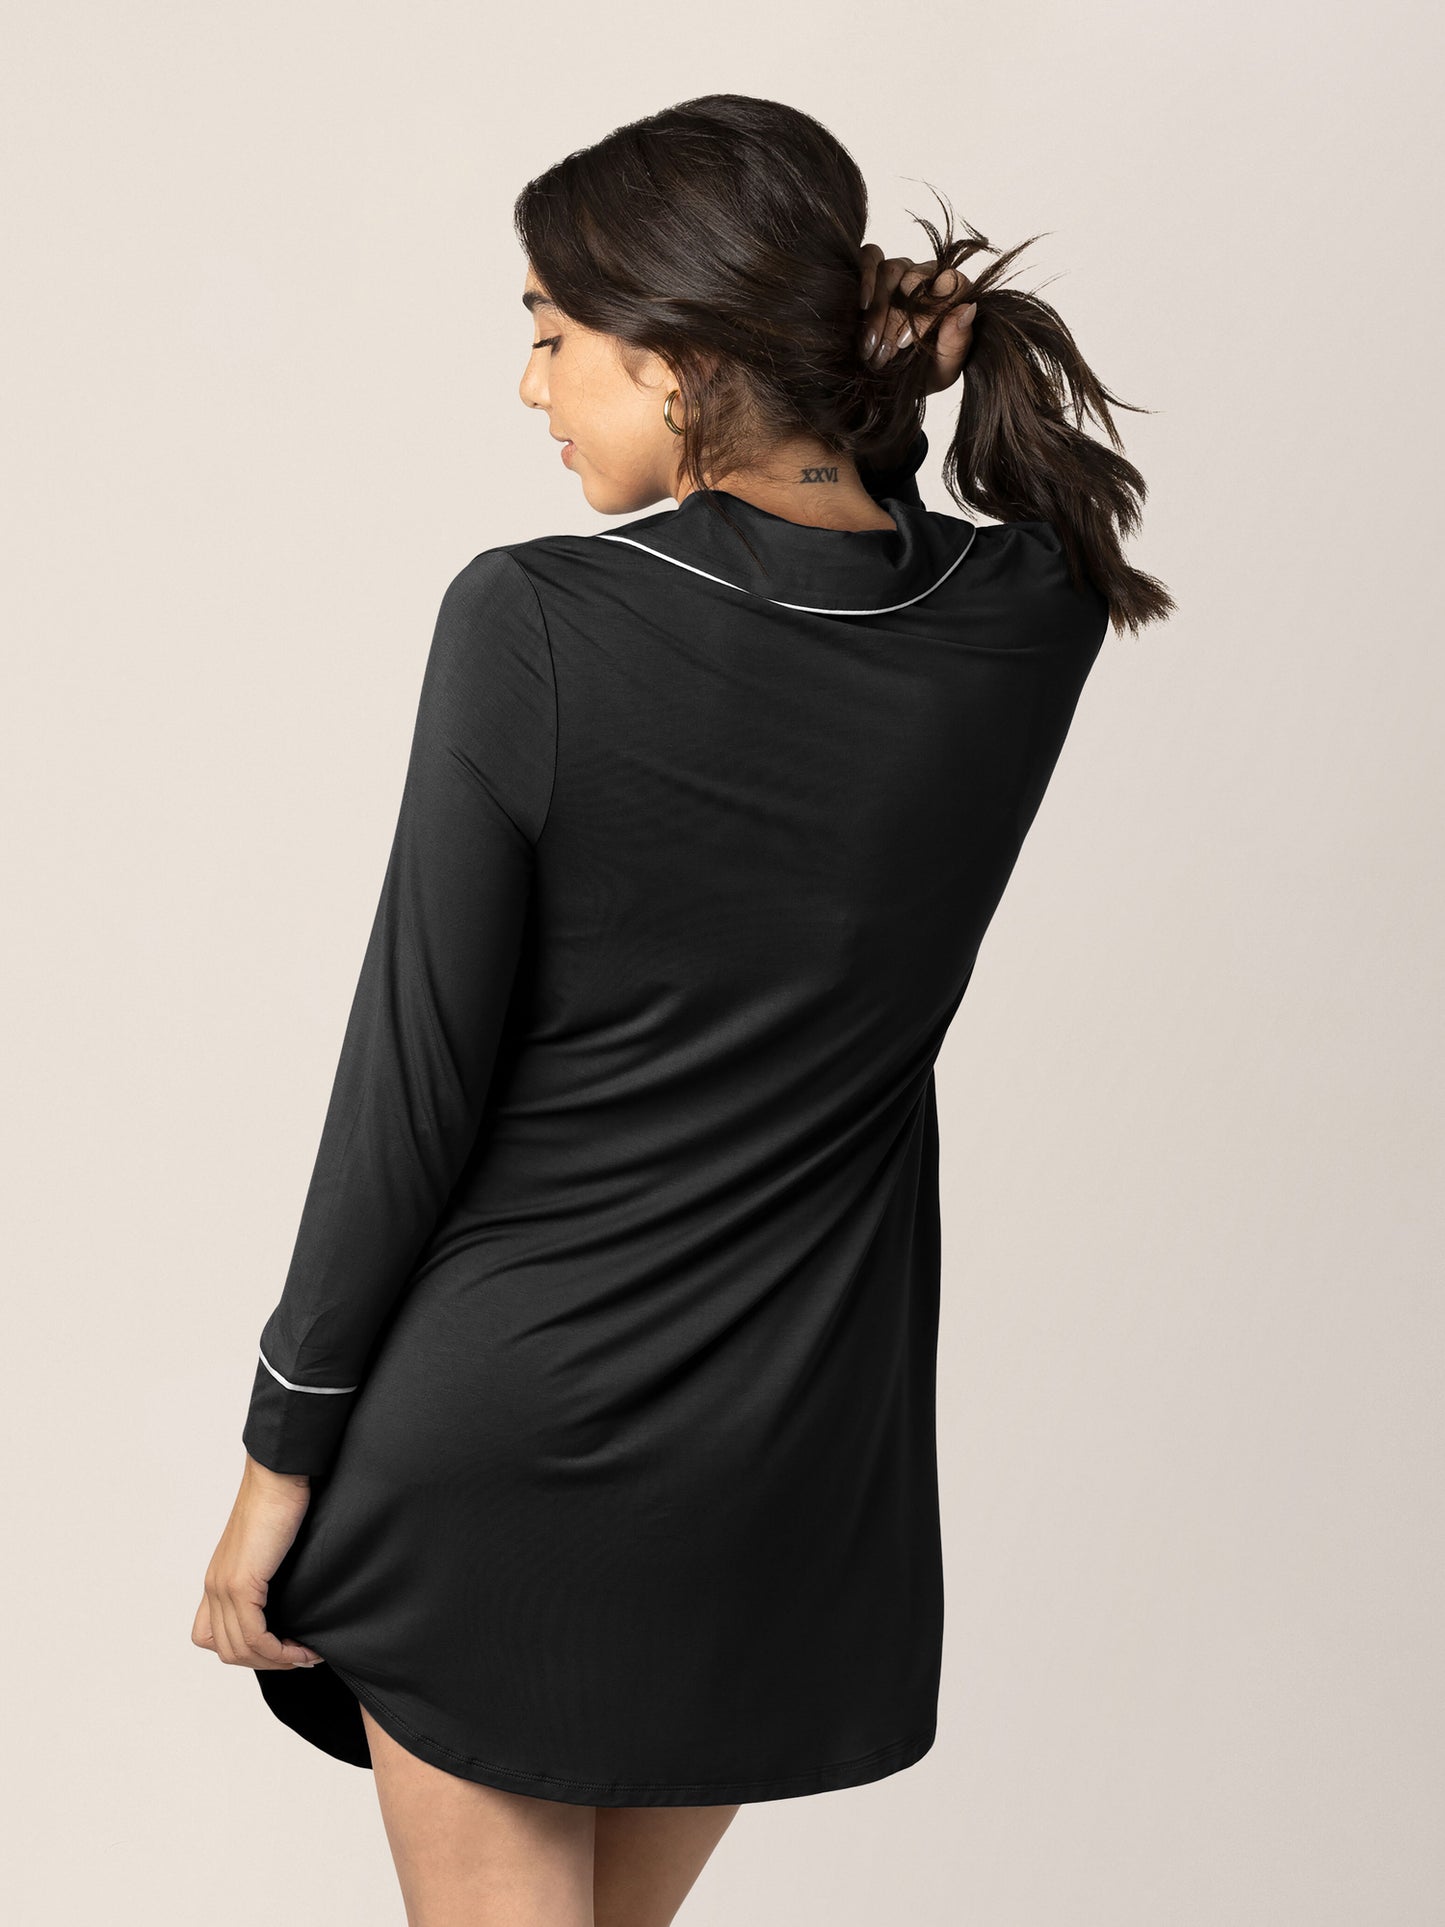 Back view of a model holding back her hair while wearing the Clea Bamboo Long Sleeve Sleep Shirt in Black